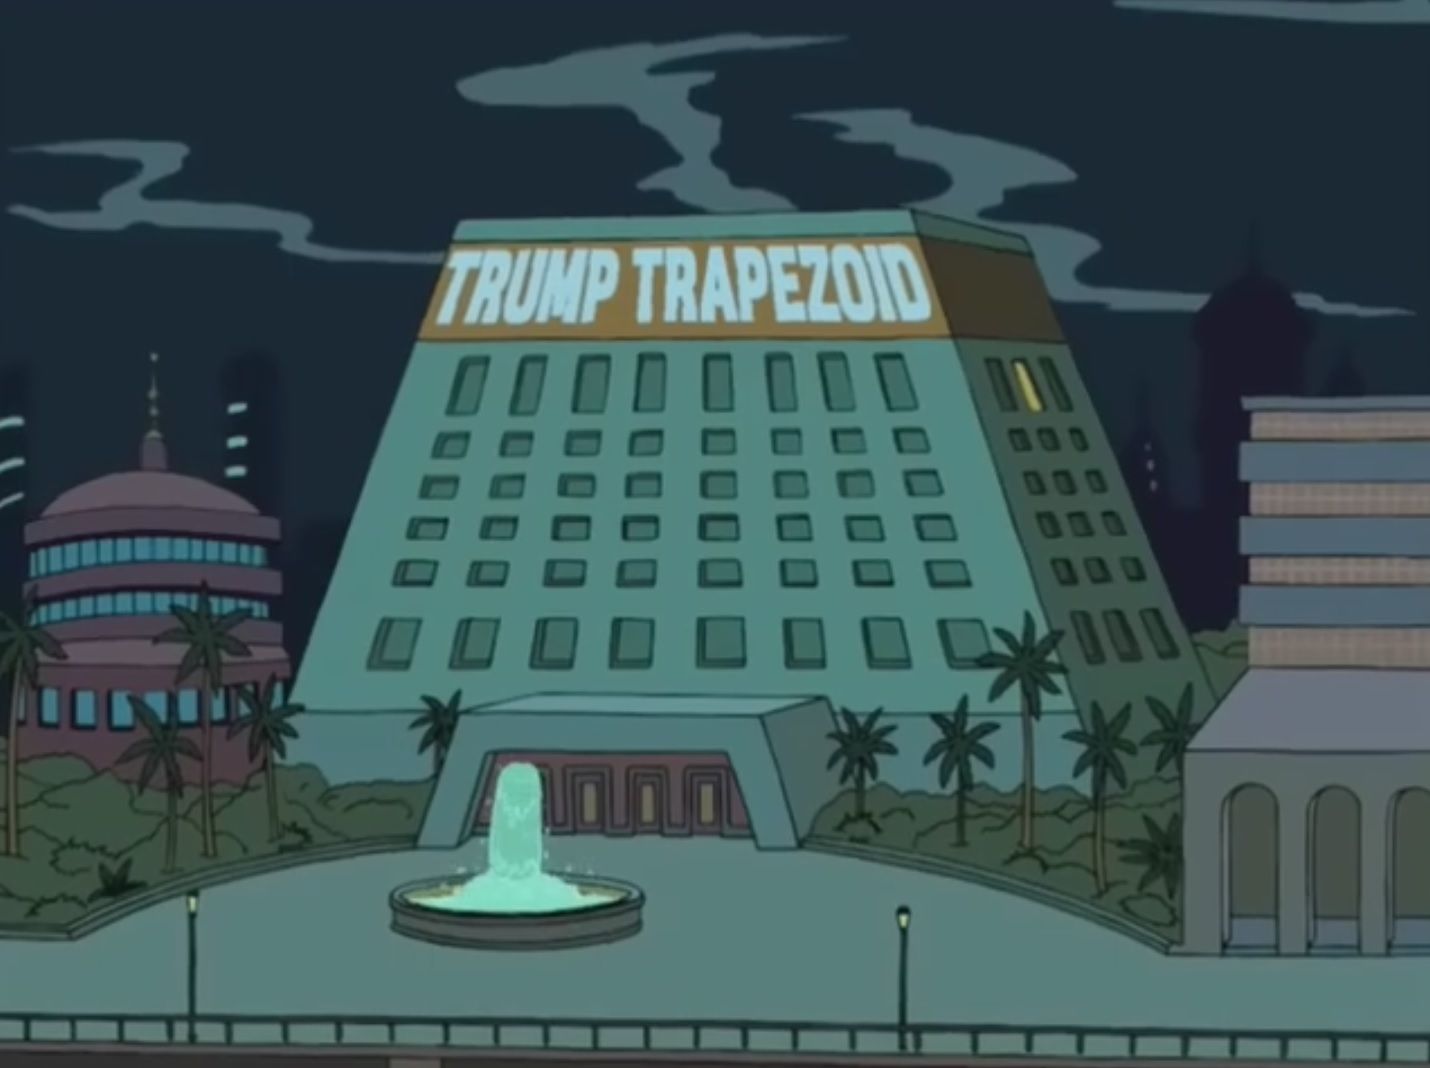 We all know Trump is into traps but few remember why